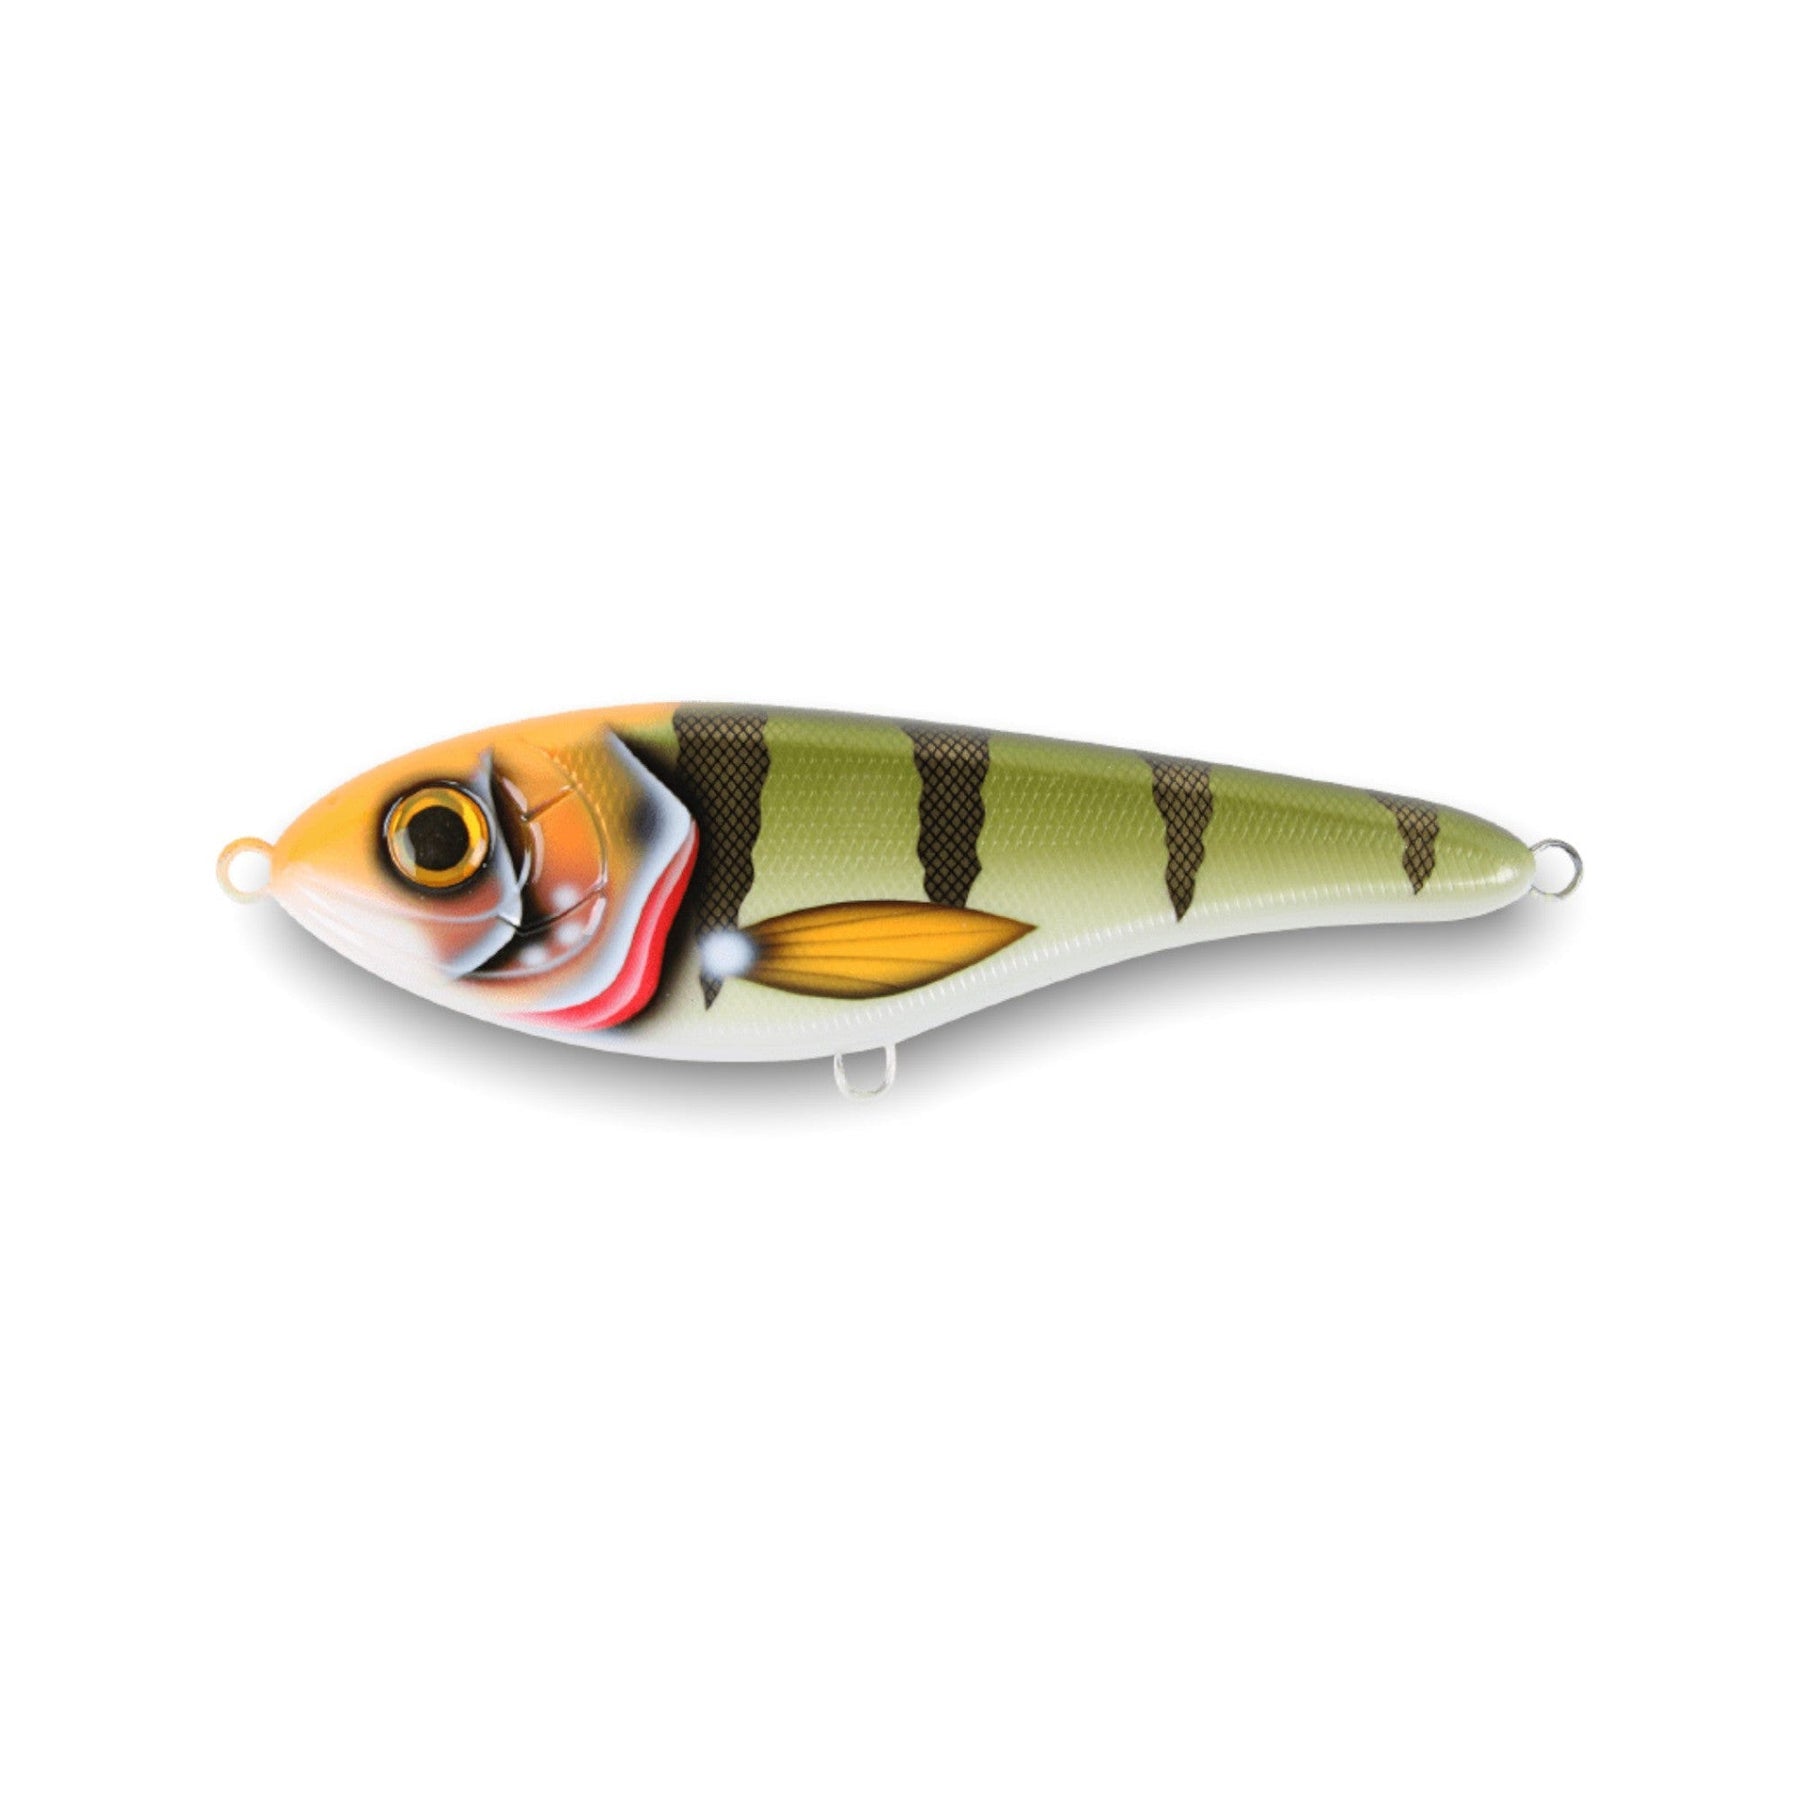 View of Jerk-Glide_Baits Strike Pro Buster Jerk Sinking Glide Bait Lightning Perch available at EZOKO Pike and Musky Shop